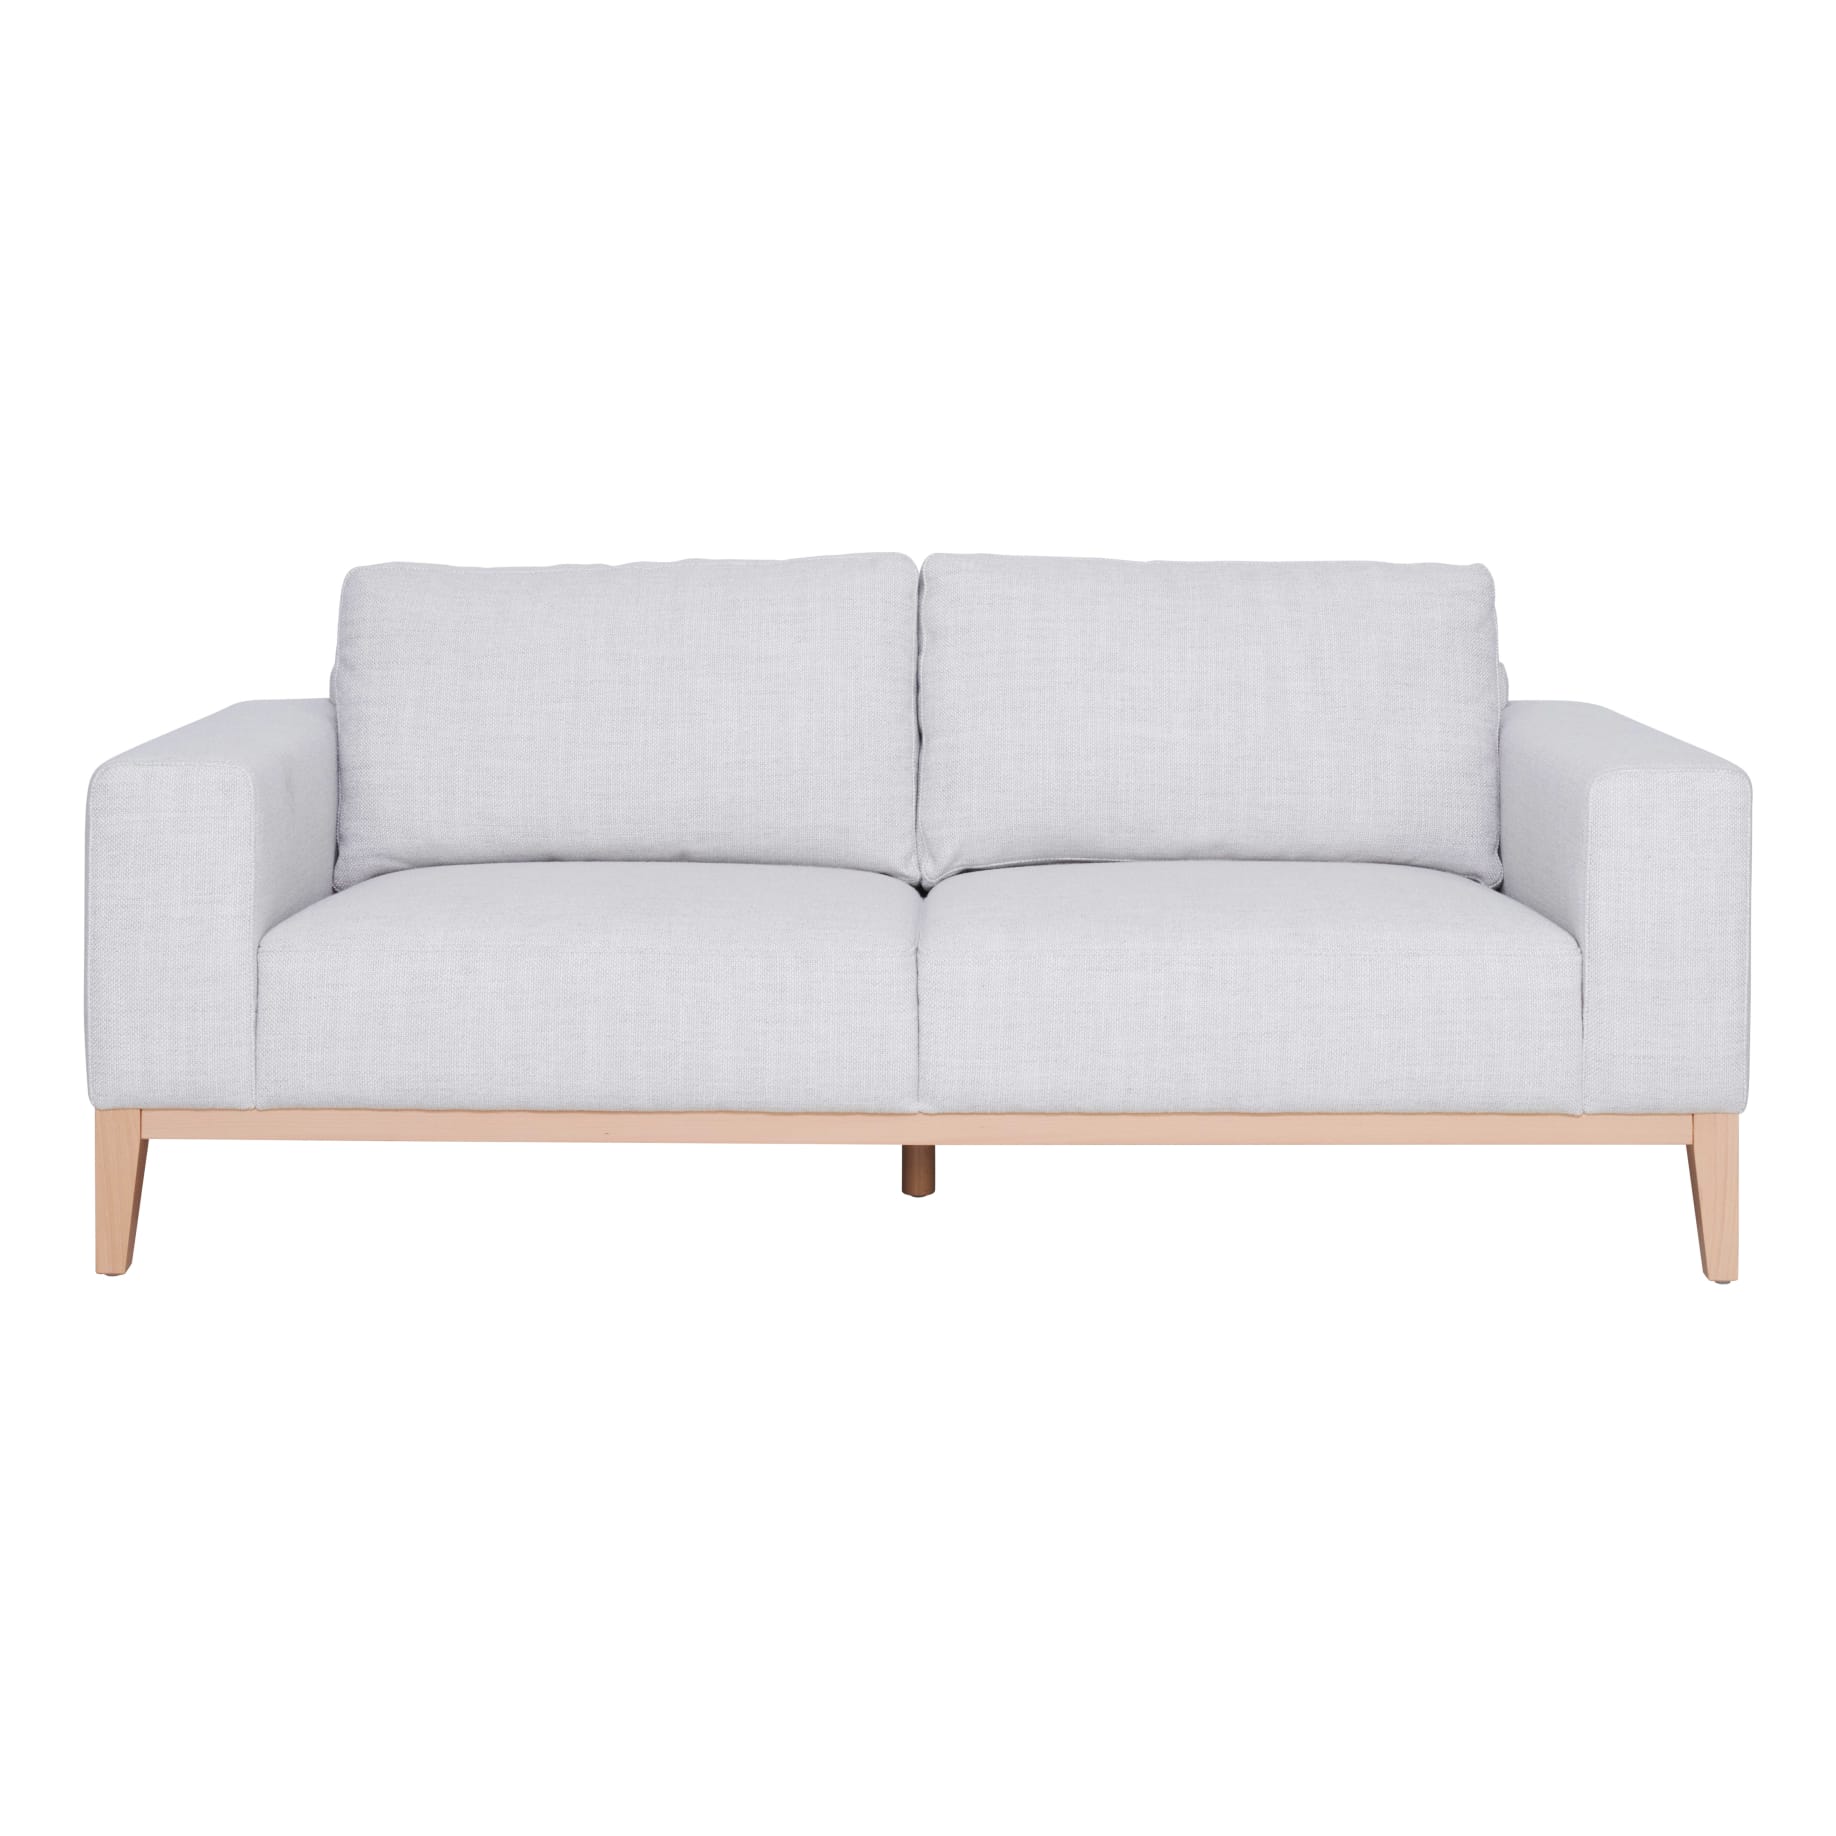 Moana 2 Seater in Kind White